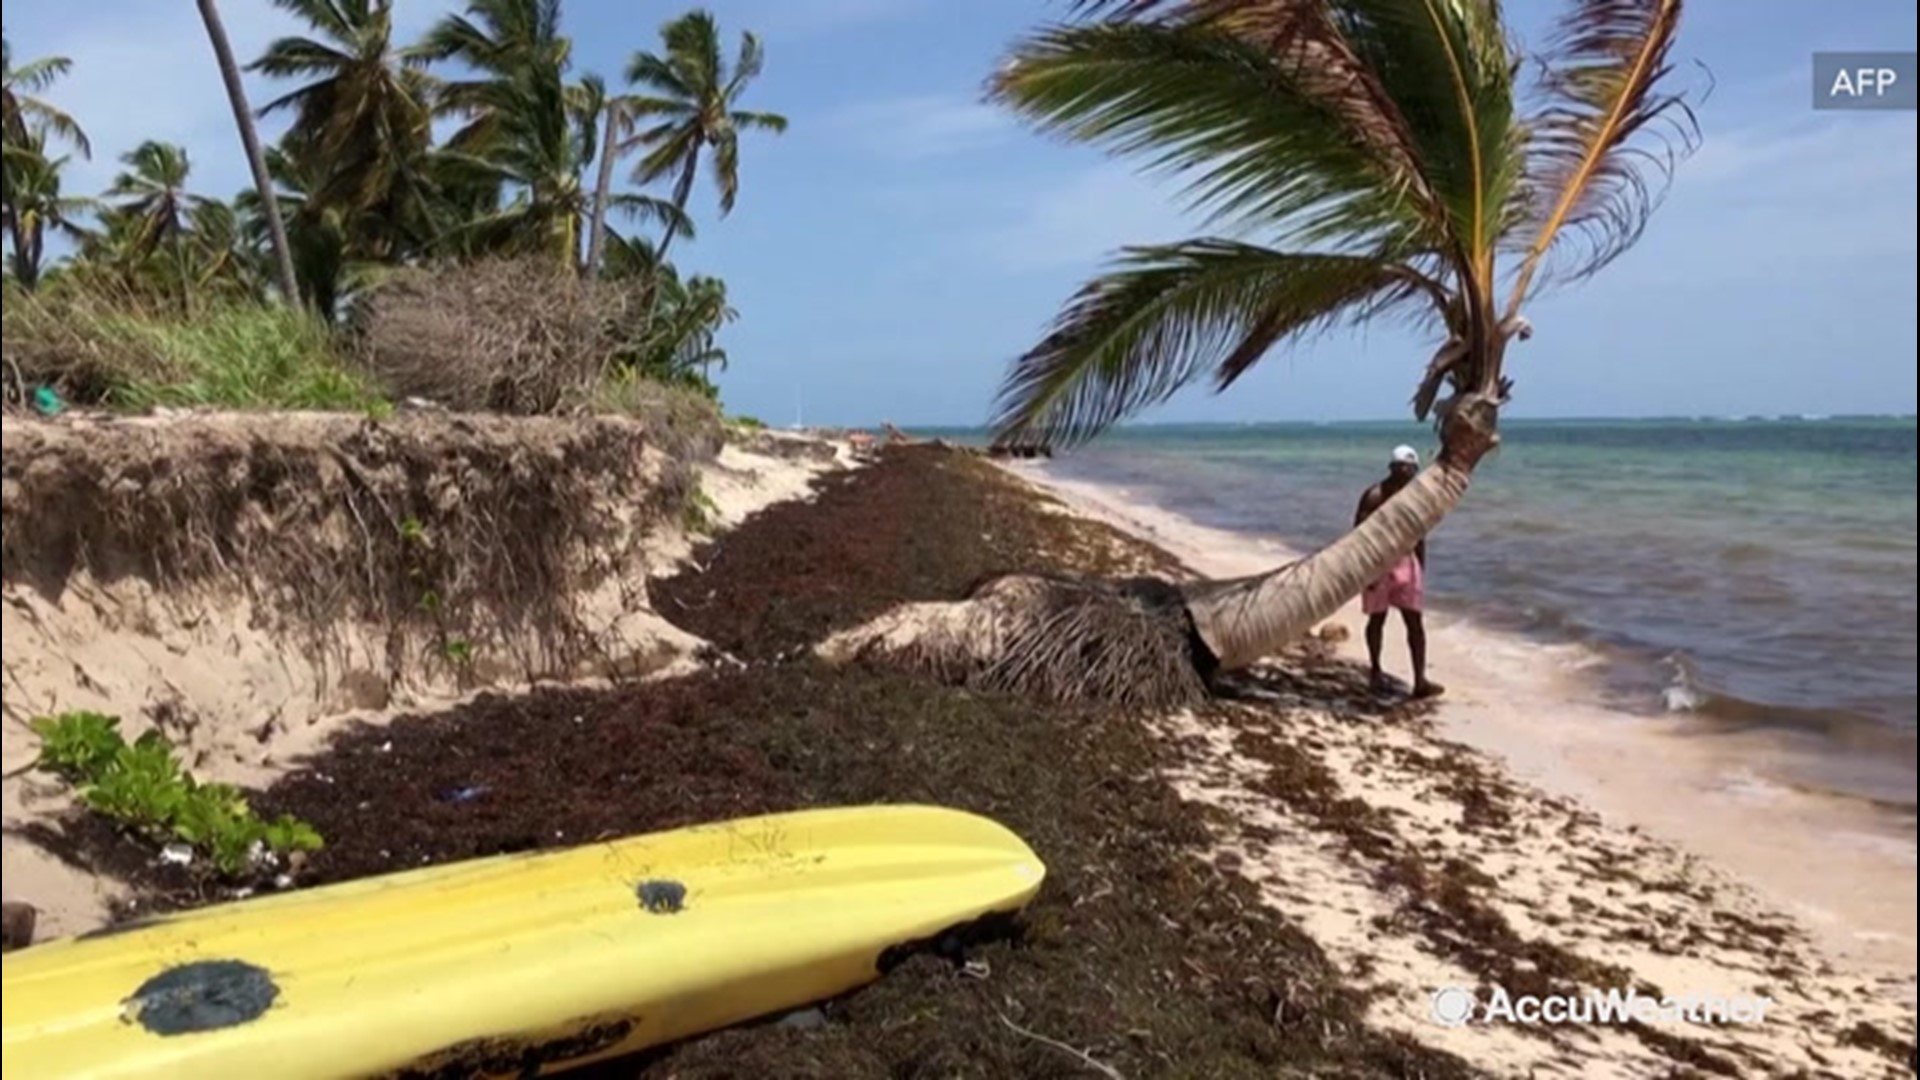 The beaches of Punta Cana, a popular tourist destination in the Dominican Republic, are covered in seaweed. While crews work to clean the beaches, the seaweed continues to roll in and experts say it may stay this way until deforestation of the Amazon rainforest stops in South America.